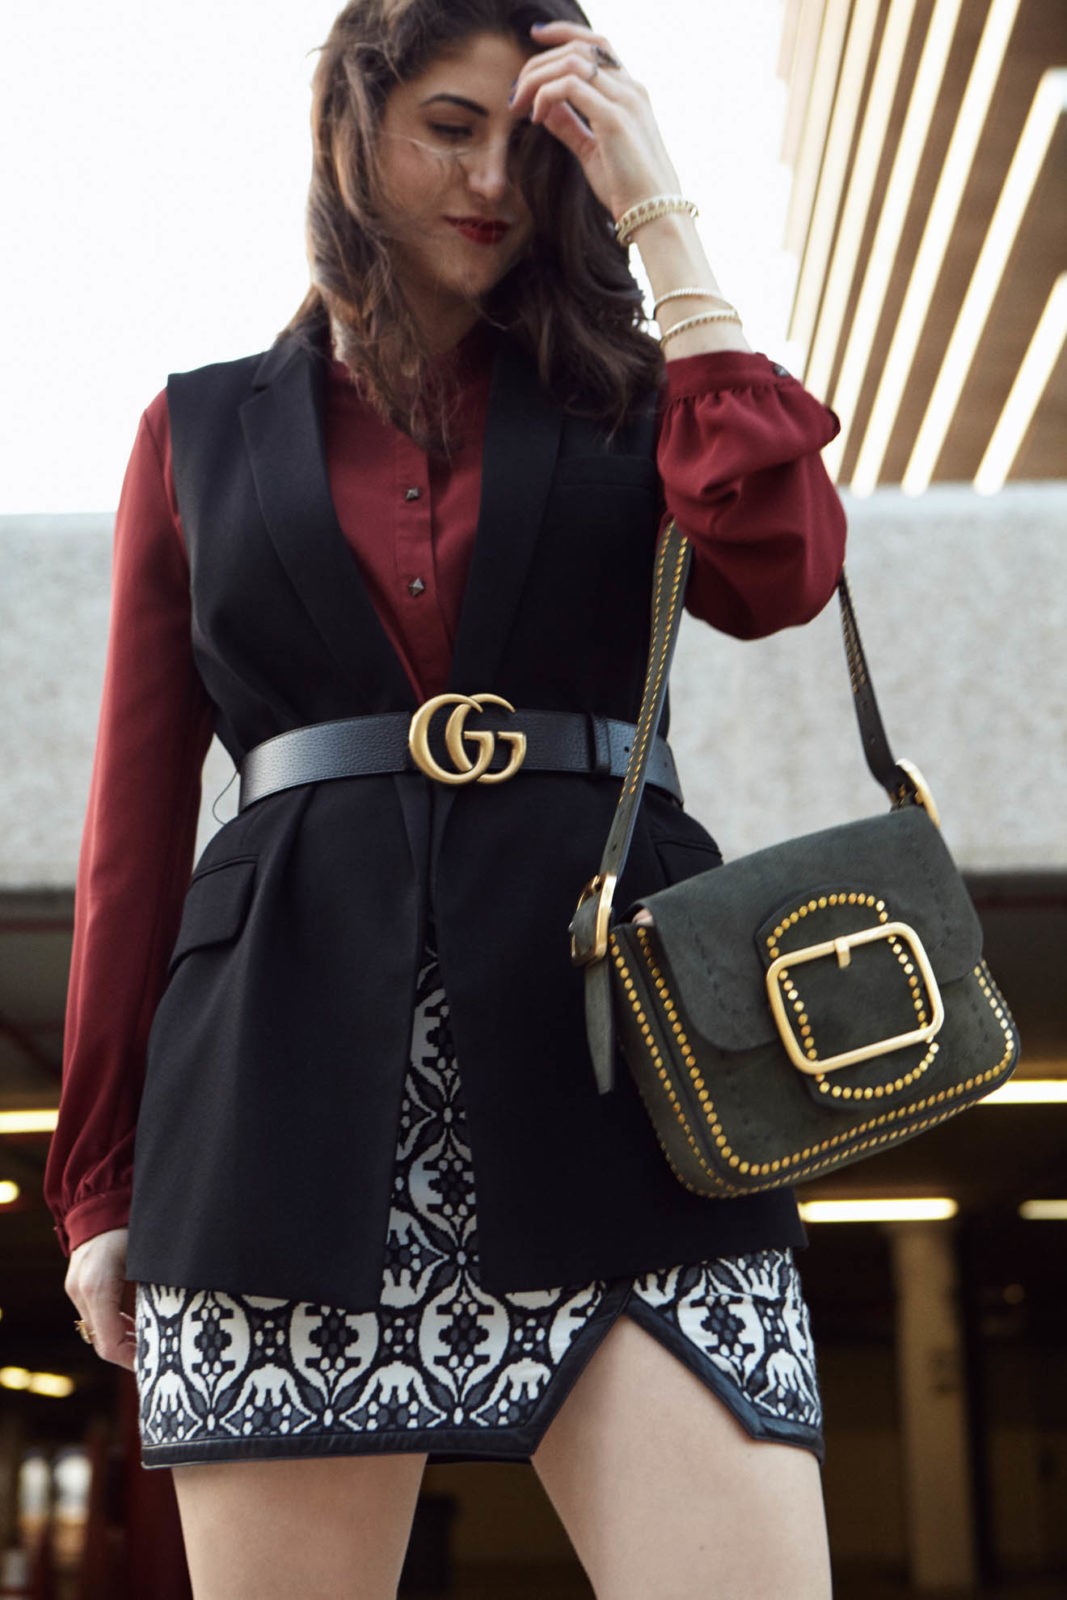 The Power of A Positive Mindset, Laura Lily - Fashion, Travel and Lifestyle Blog, Gucci Marmont Belt, Tory Burch Studded Suede Bag, Kendra Scott jewelry,